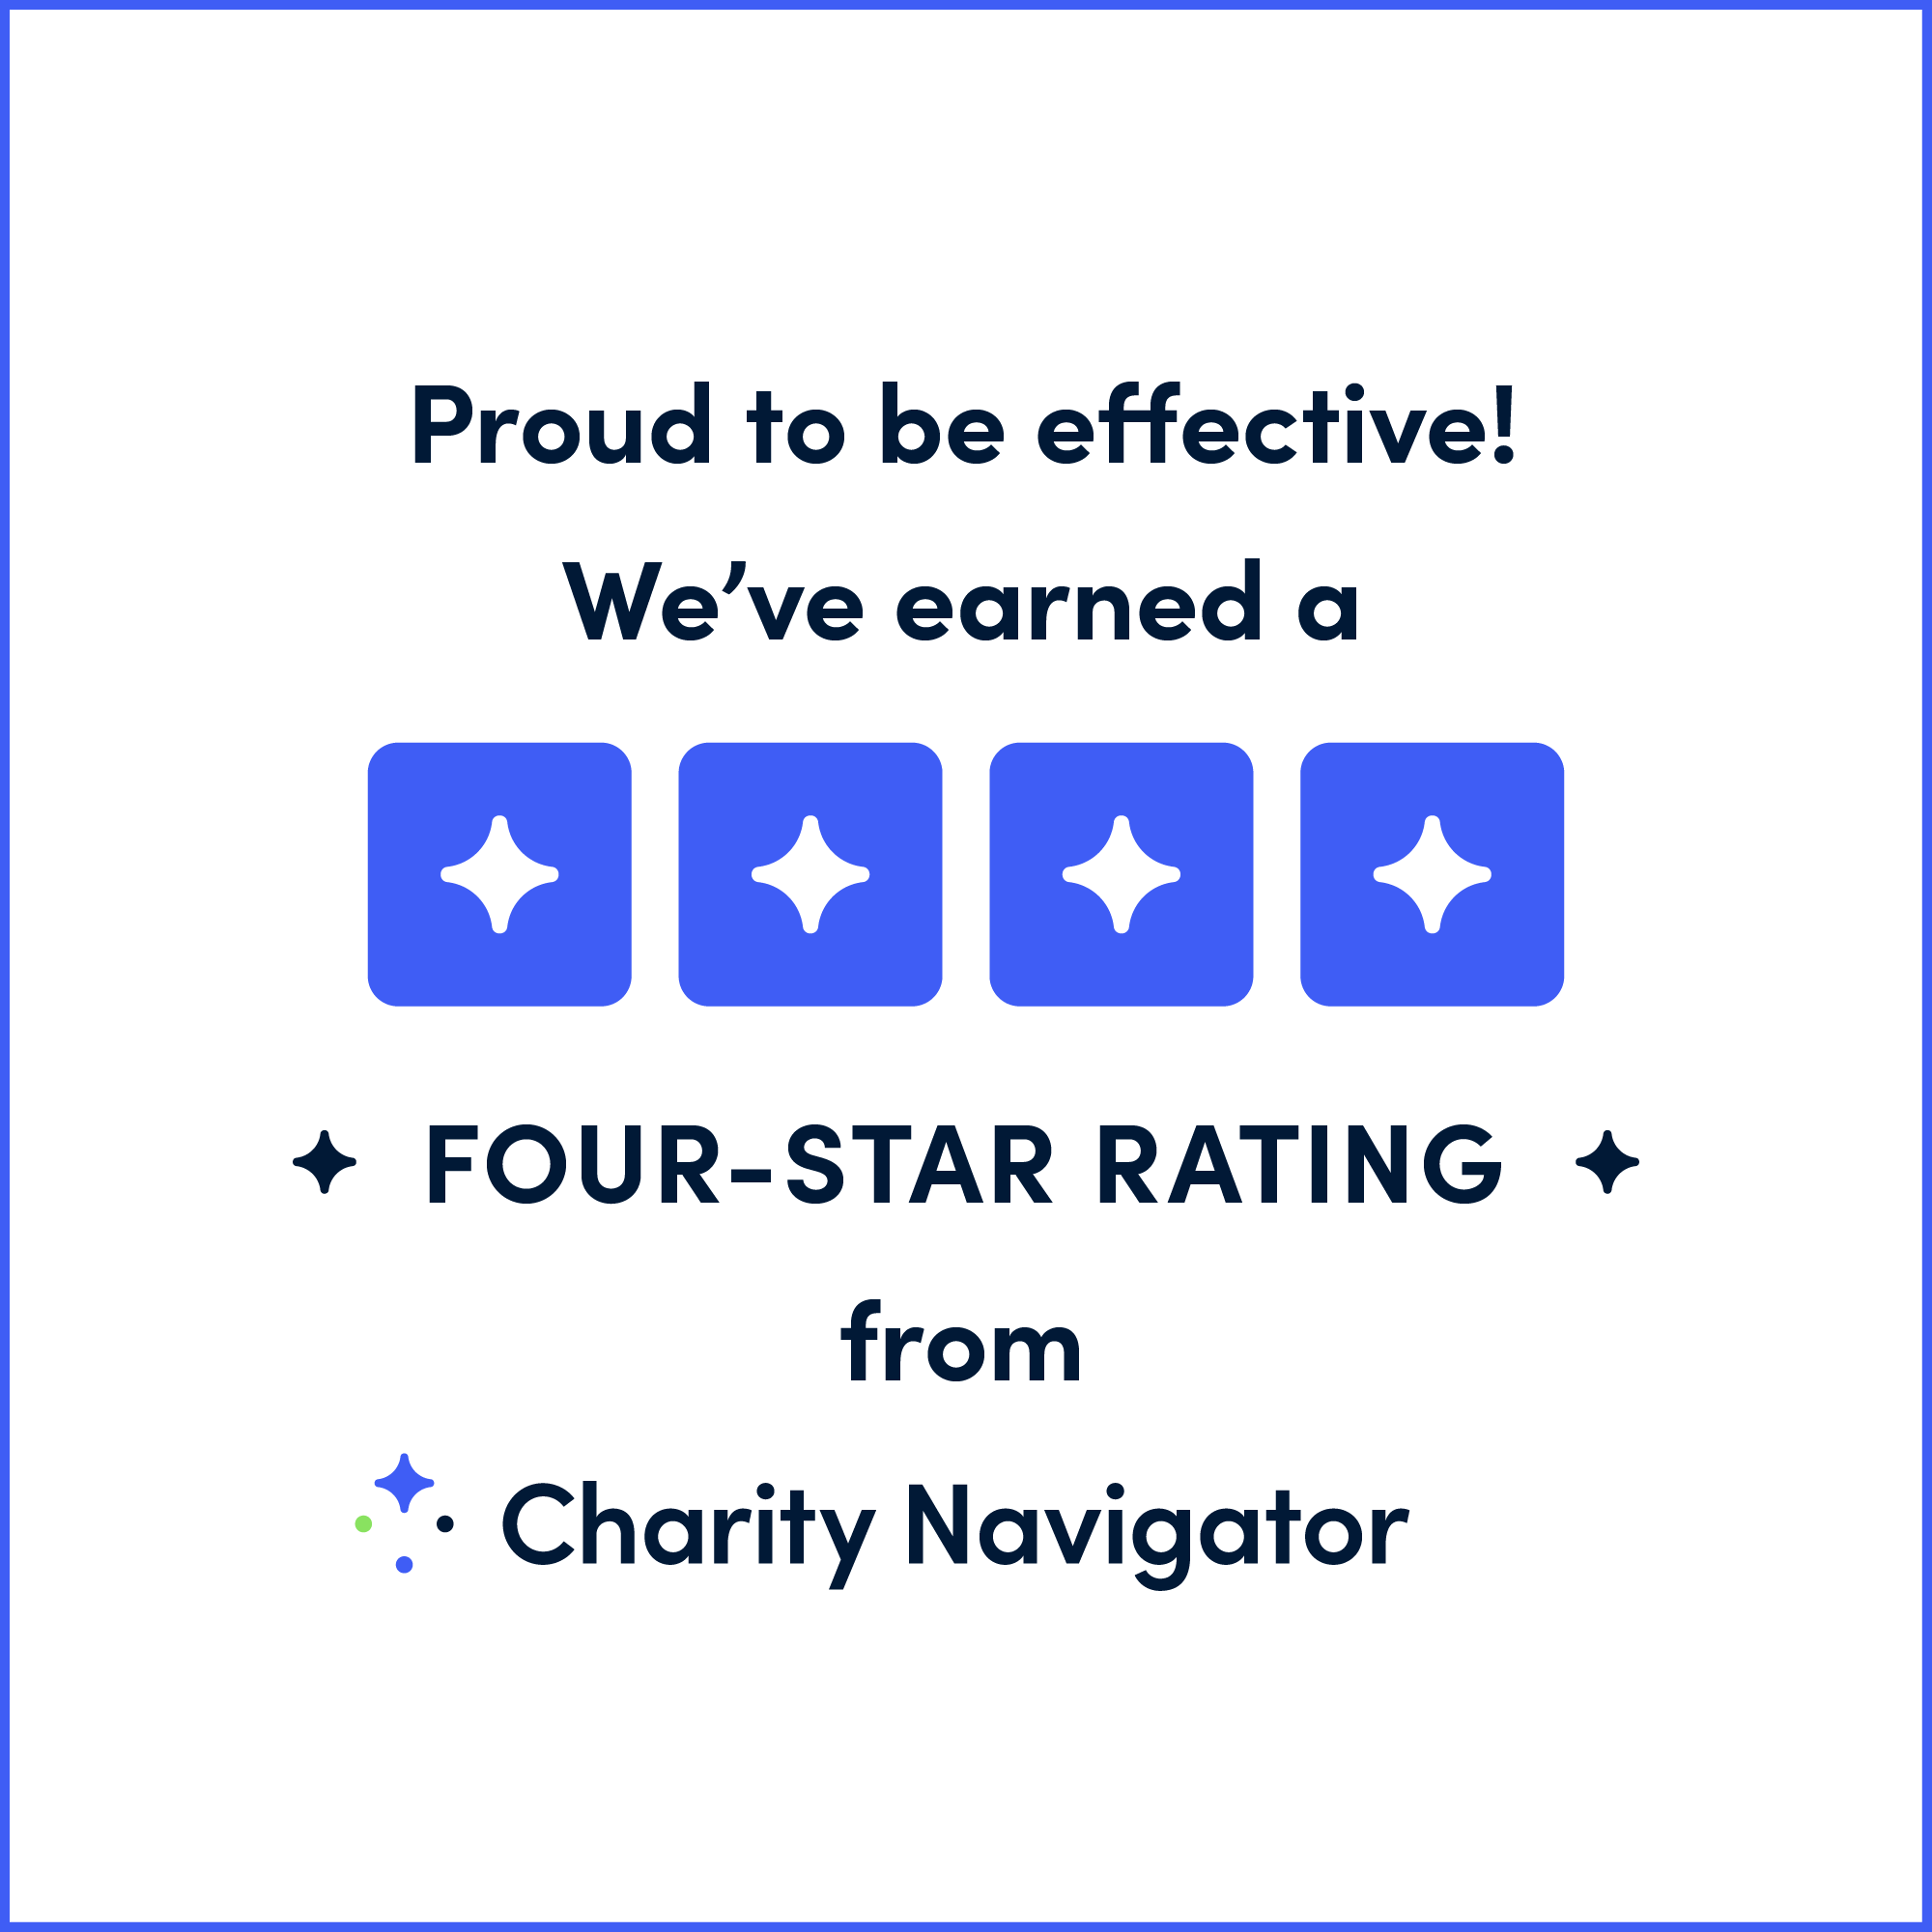 4-star rating from Charity Navigator